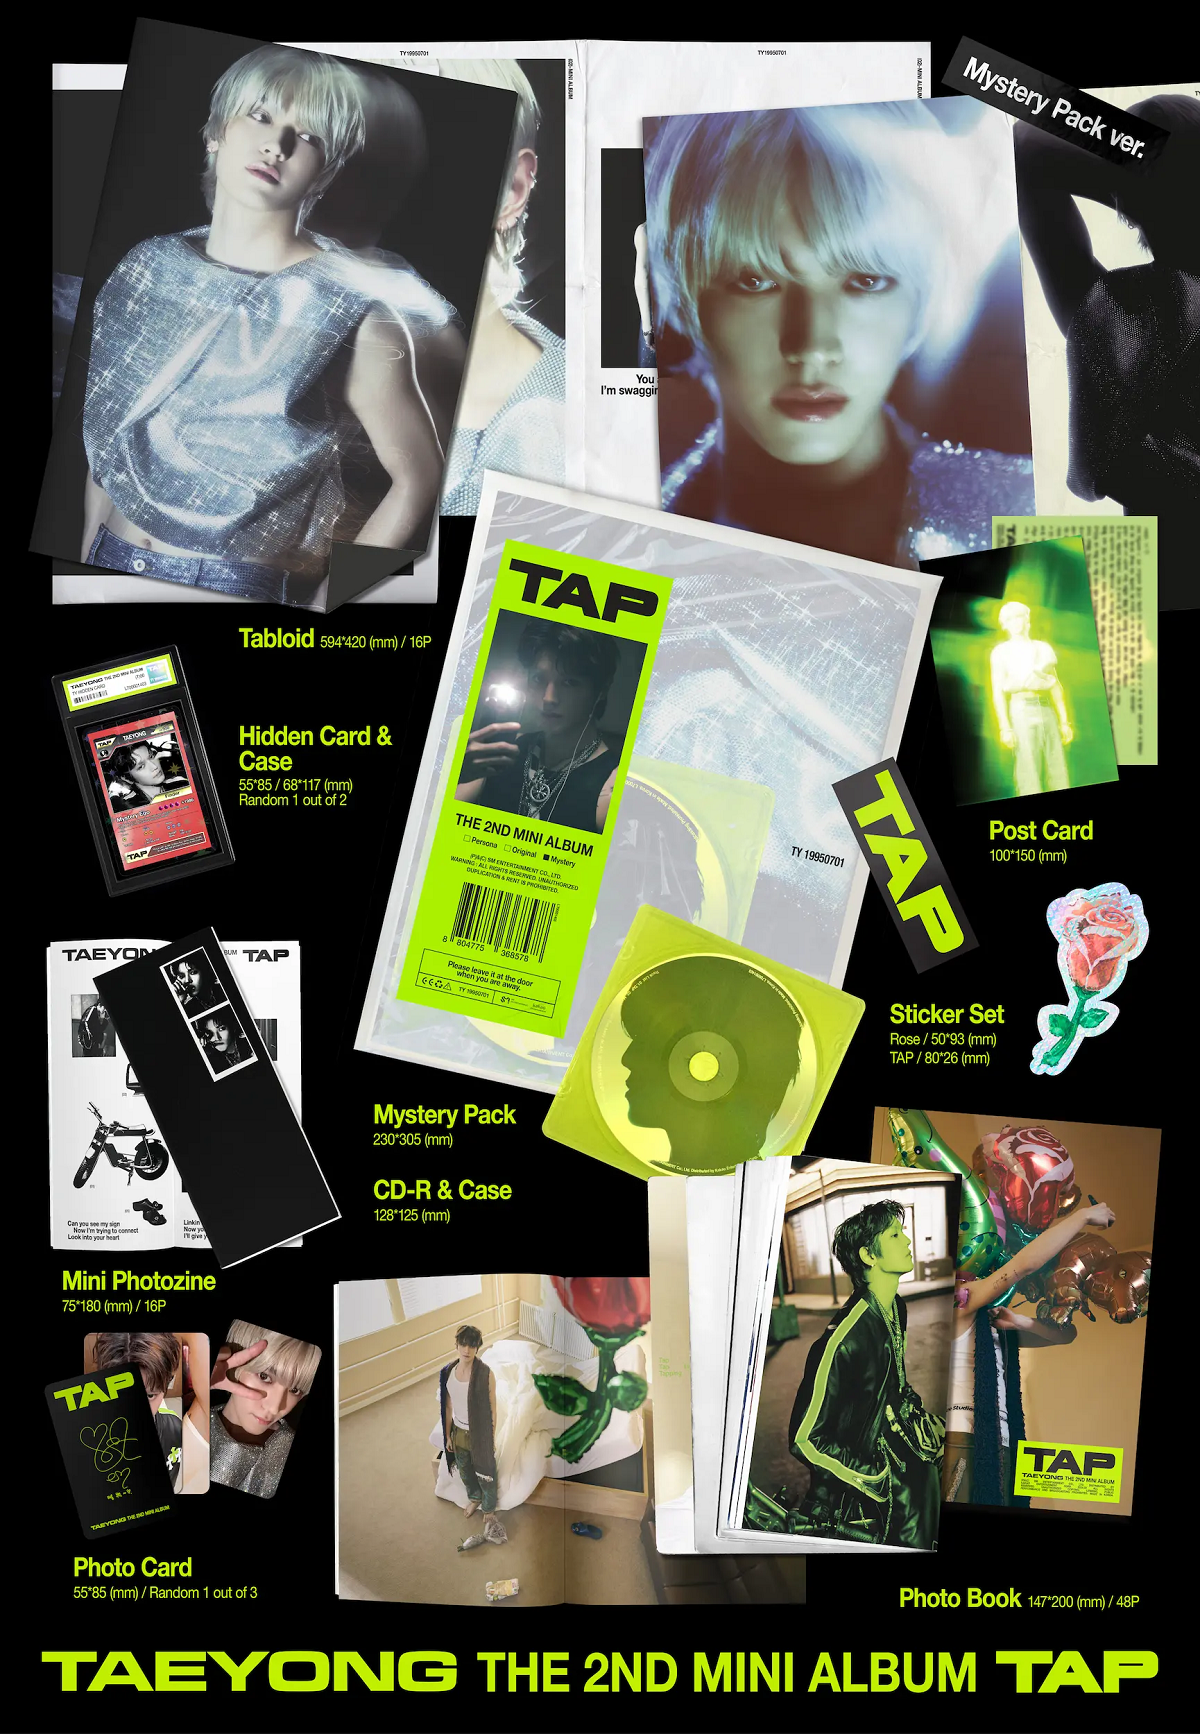 [TAEYONG (NCT)] 2nd Mini Album [TAP] (Mystery Pack Ver.) contents